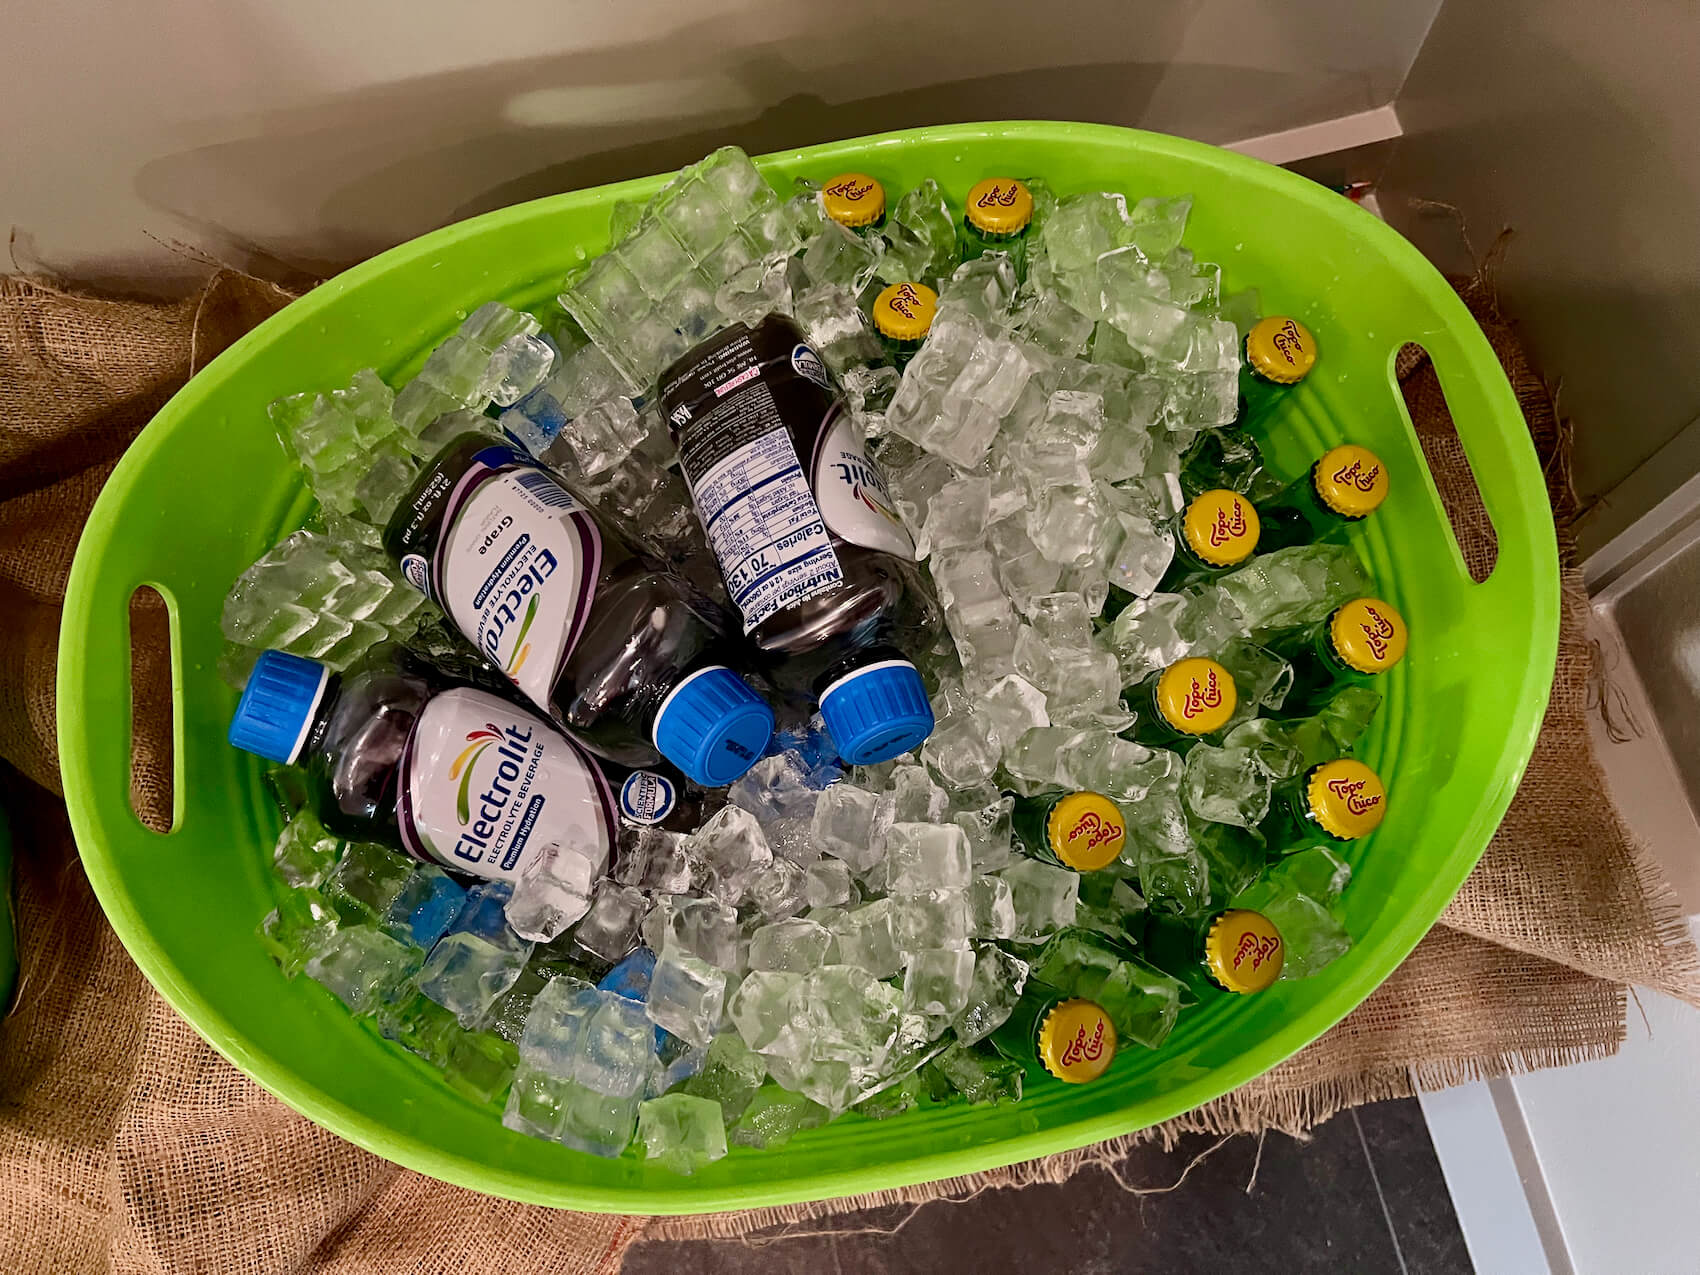 Green plastic bucket of Electrolit and Topo Chico full of ice